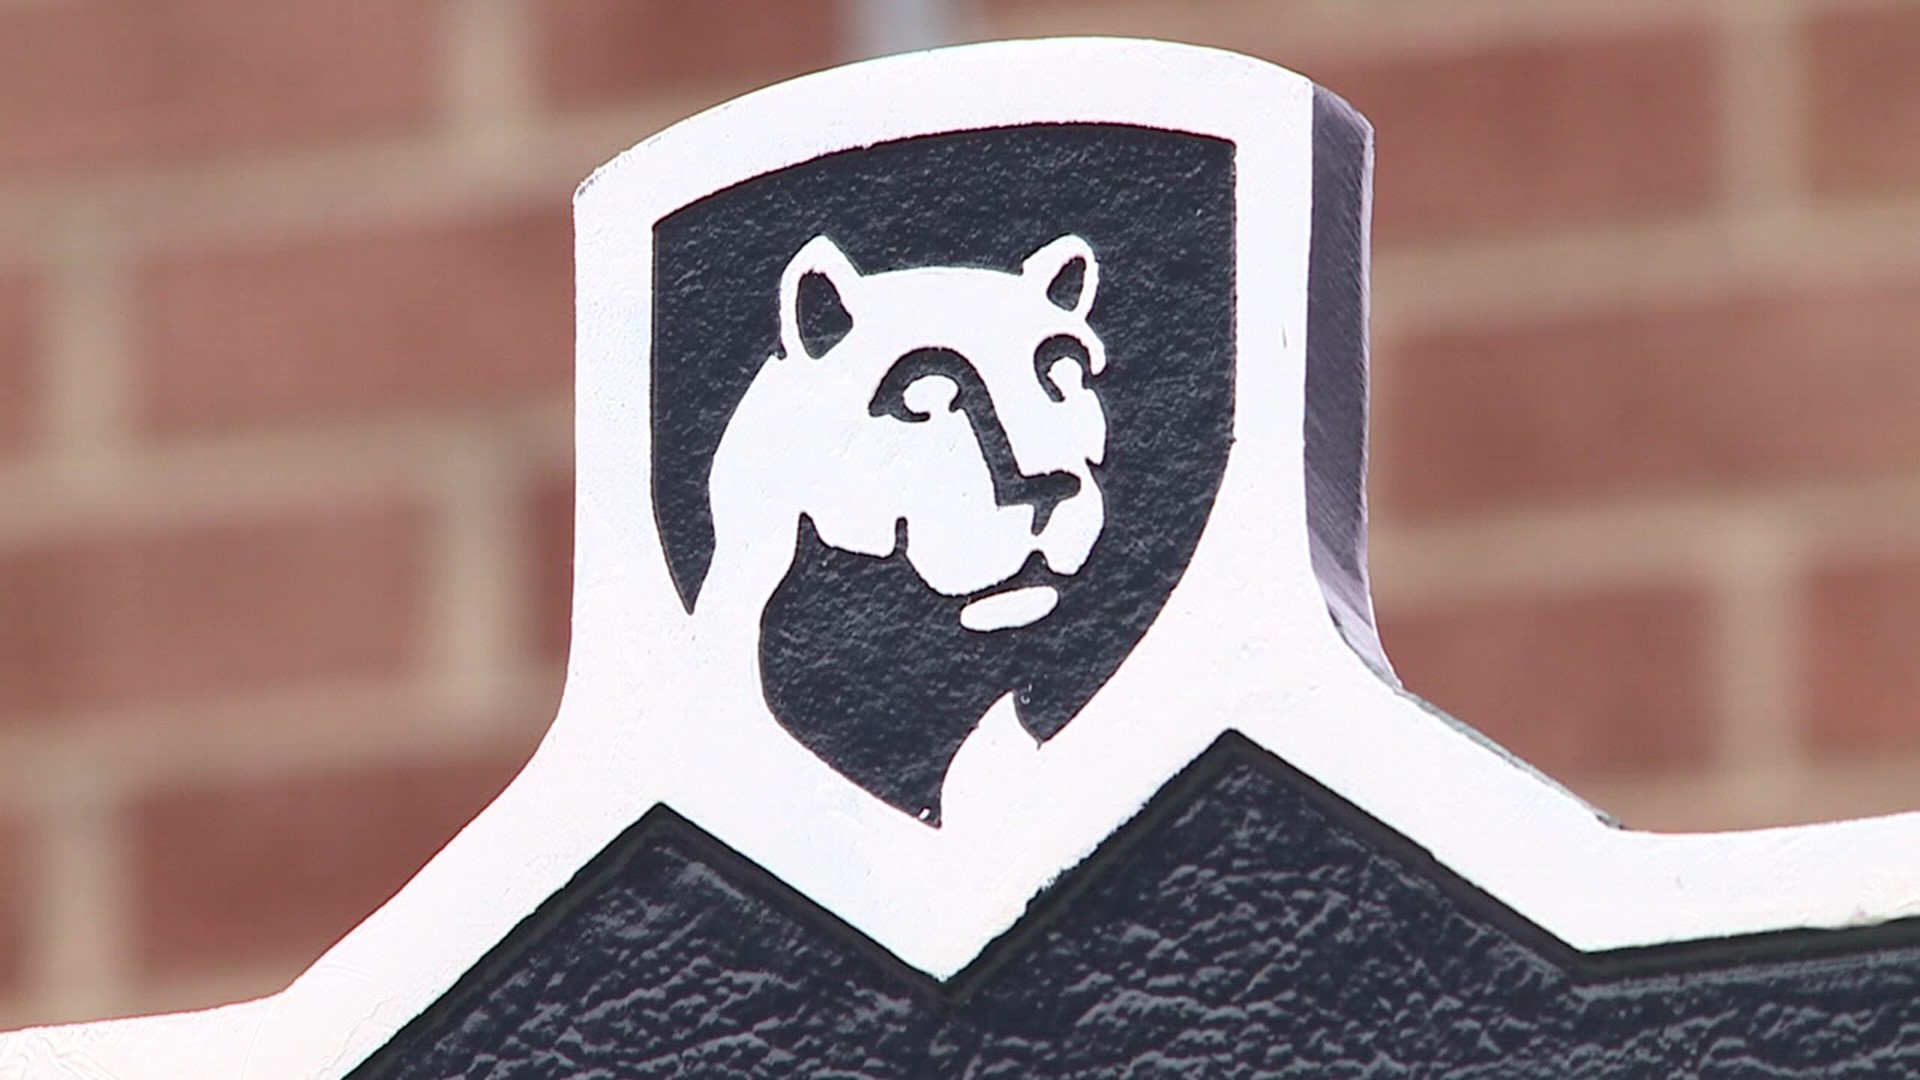 The university lists 20 Commonwealth Campuses in the state that could see a 14% cut in funding.